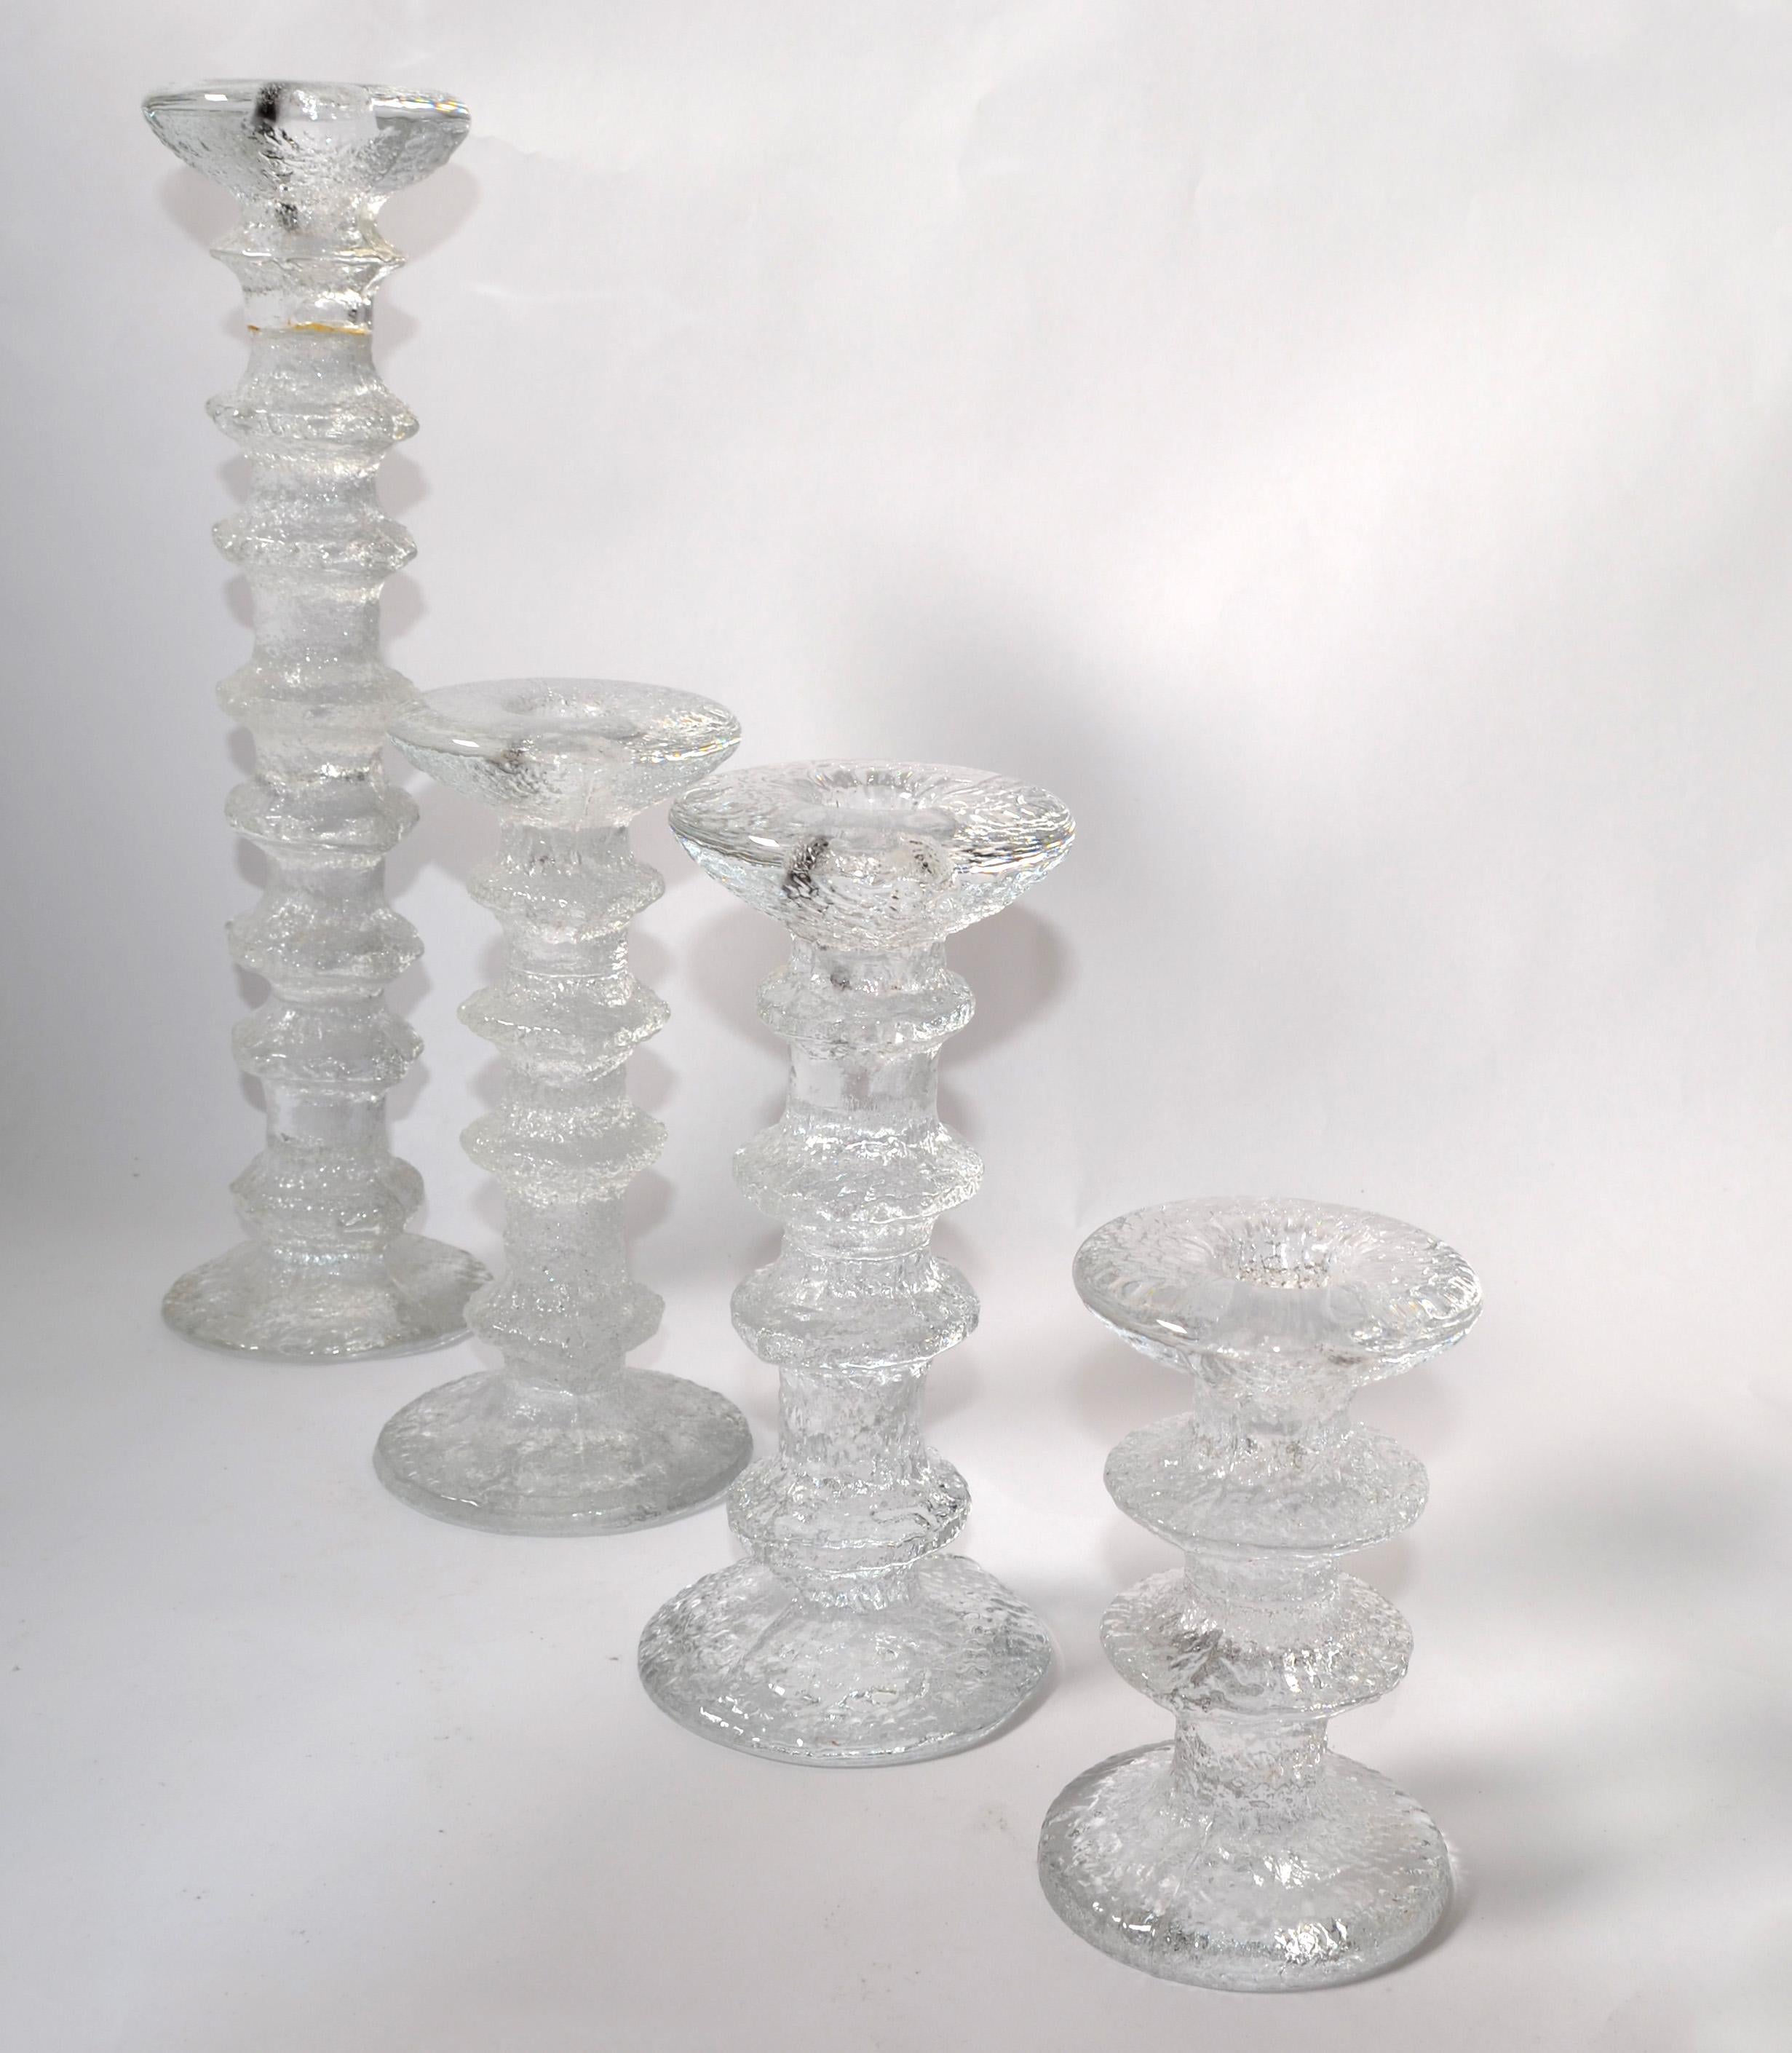 Set of 4 Scandinavian Modern Finland Iittala Art Glass with bubbles Festivo Candle Holders designed by Timo Sarpaneva, made in the late 1970s.
Top Candle hole measures: 0.75 inches.
Core Diameter measures: 2.75 inches.
Height graduates from: 12.25